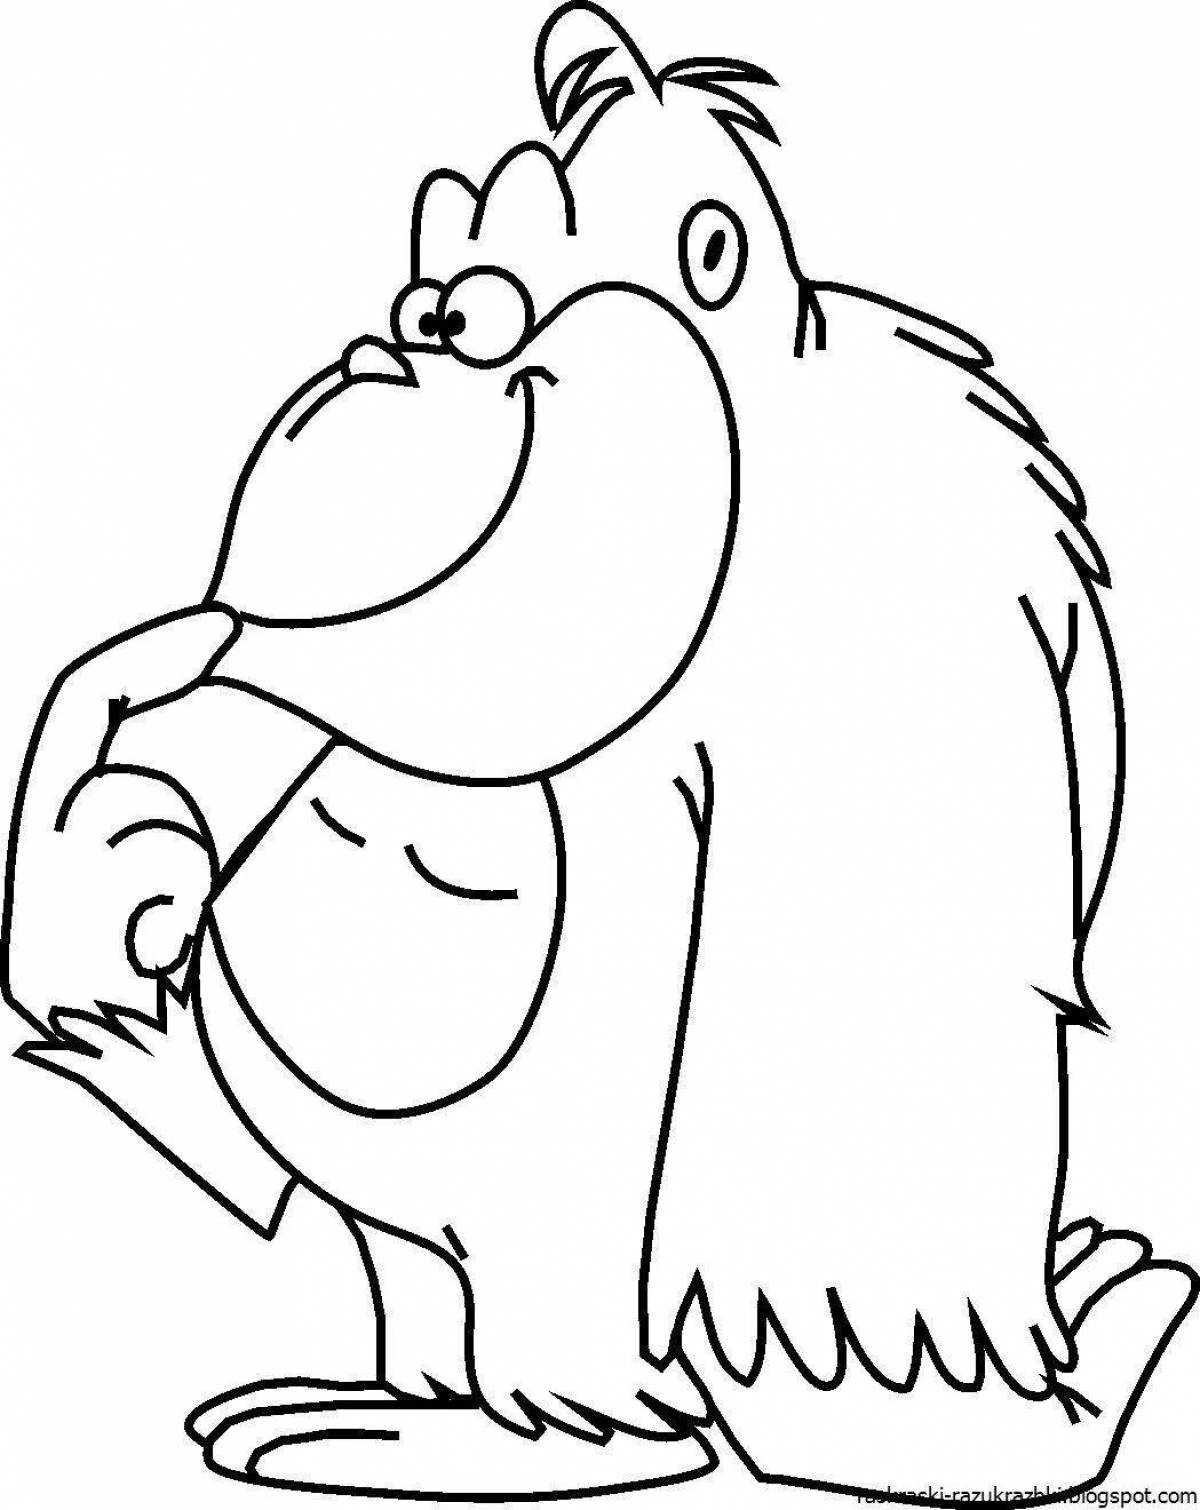 Animated coloring pages for kids